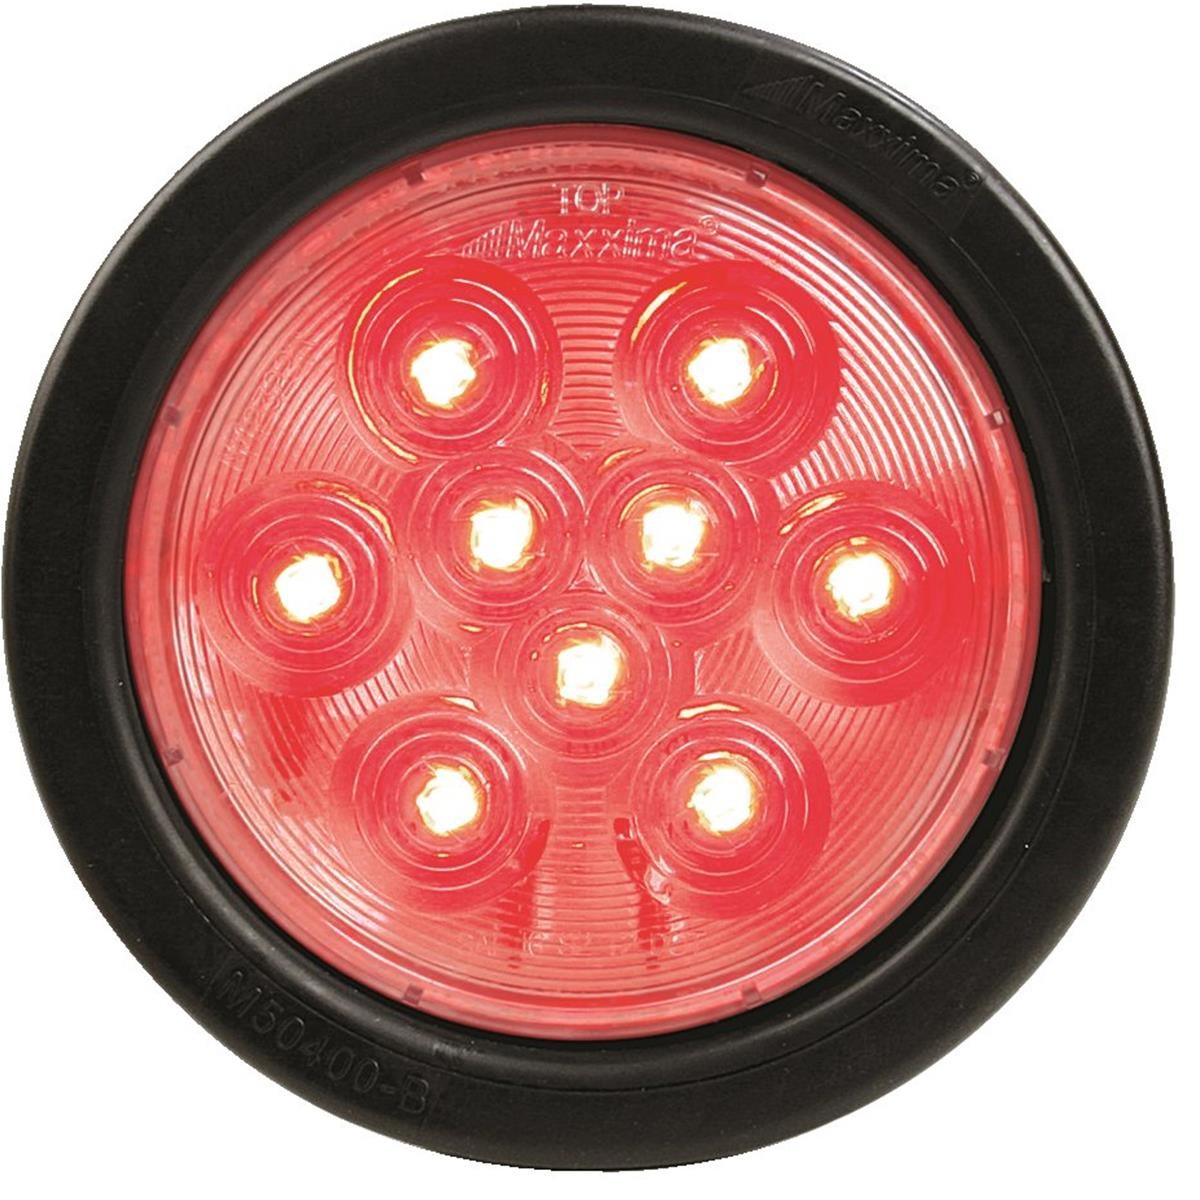 MAXXIMA LED Round Body Light w Clear Lens Red 4"